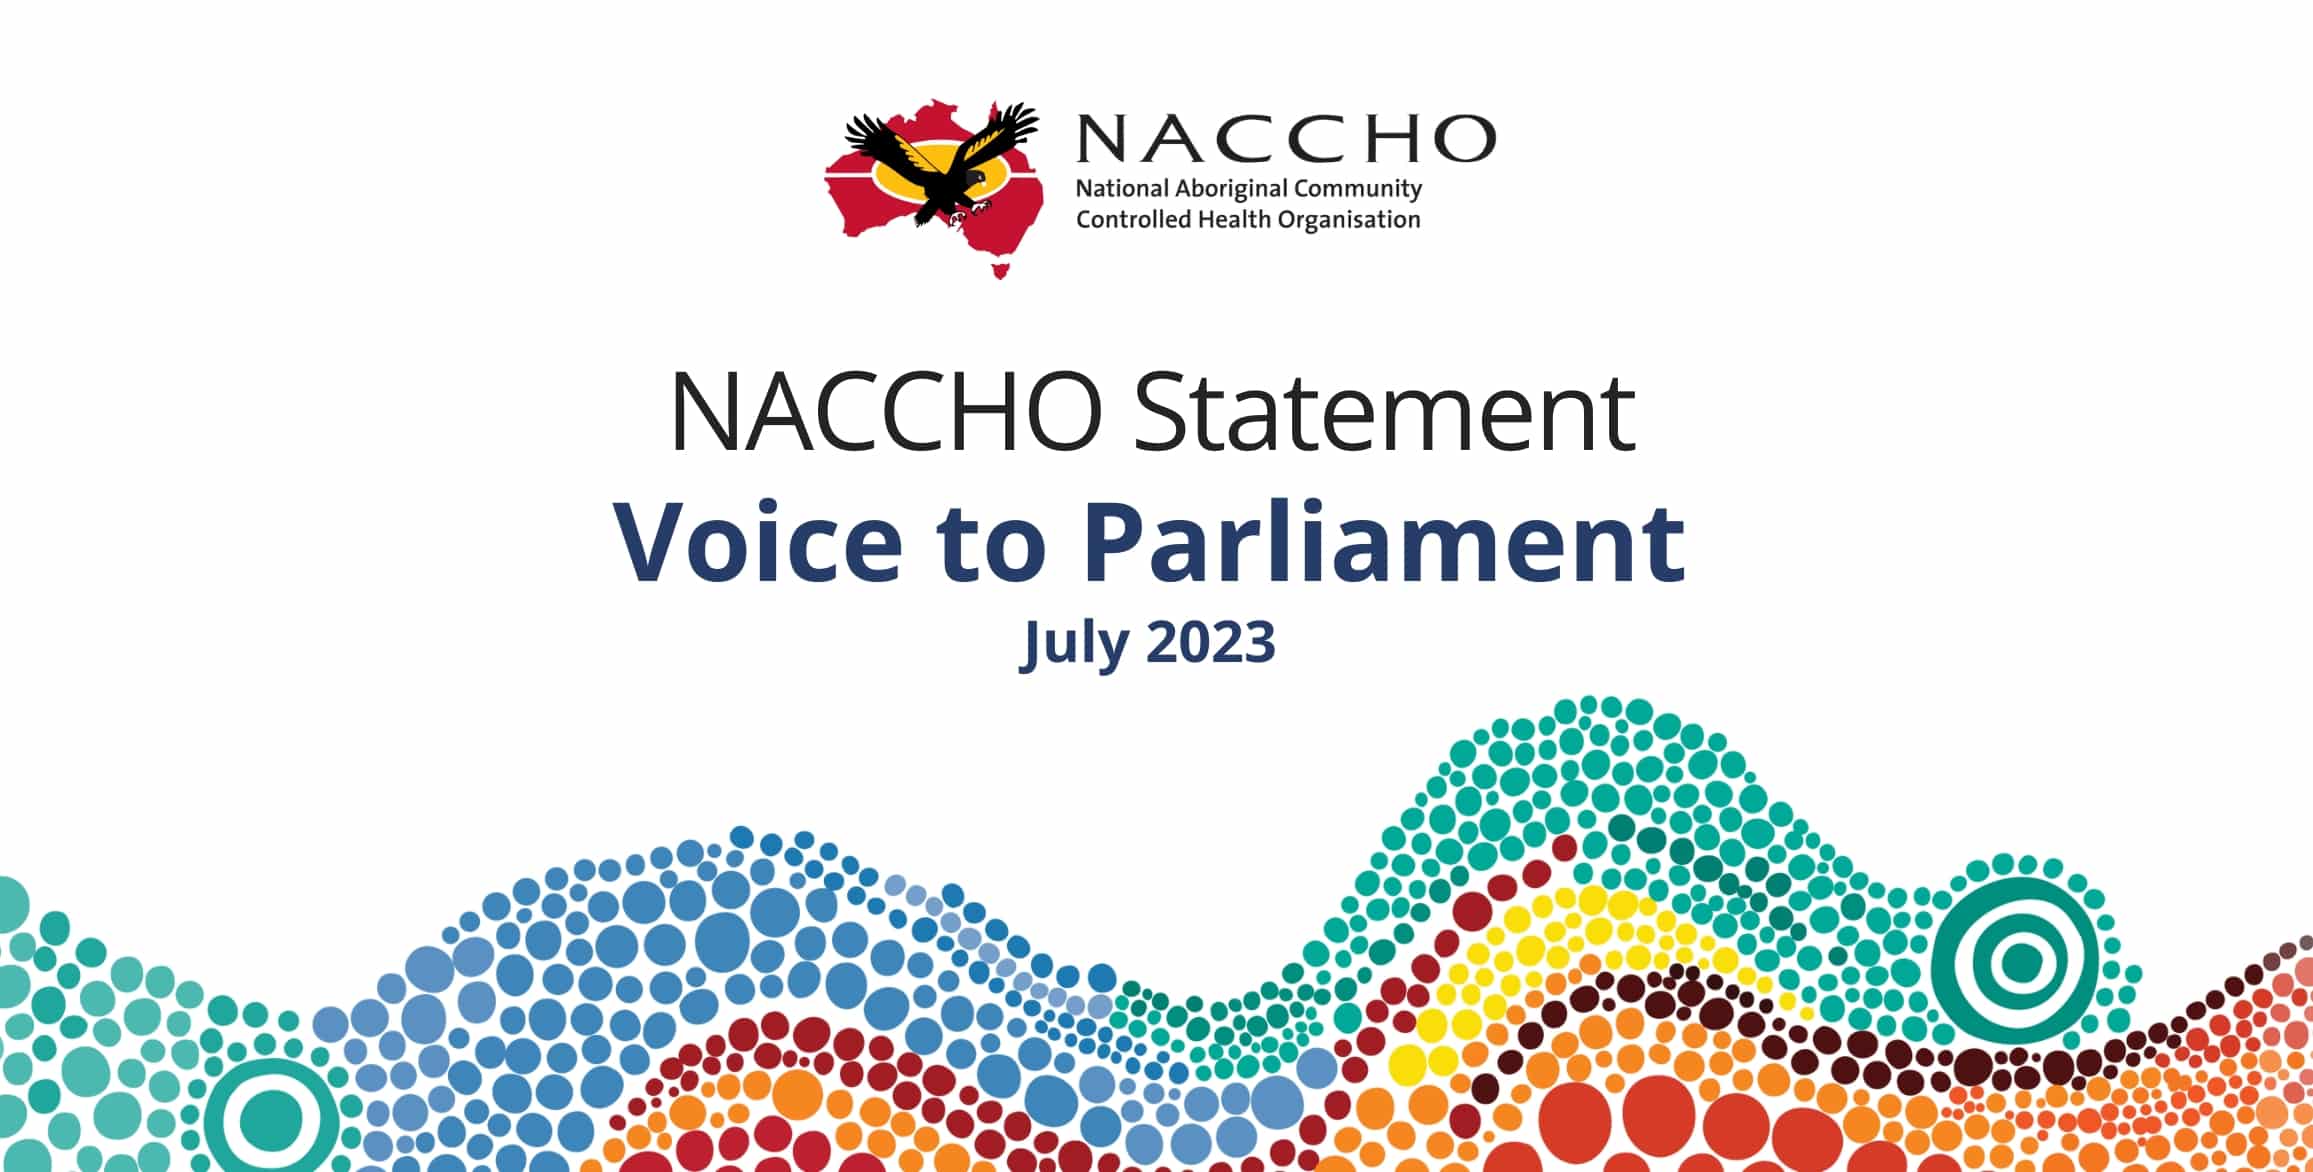 THE NACCHO BOARD SUPPORTS THE ULURU STATEMENT FROM THE HEART